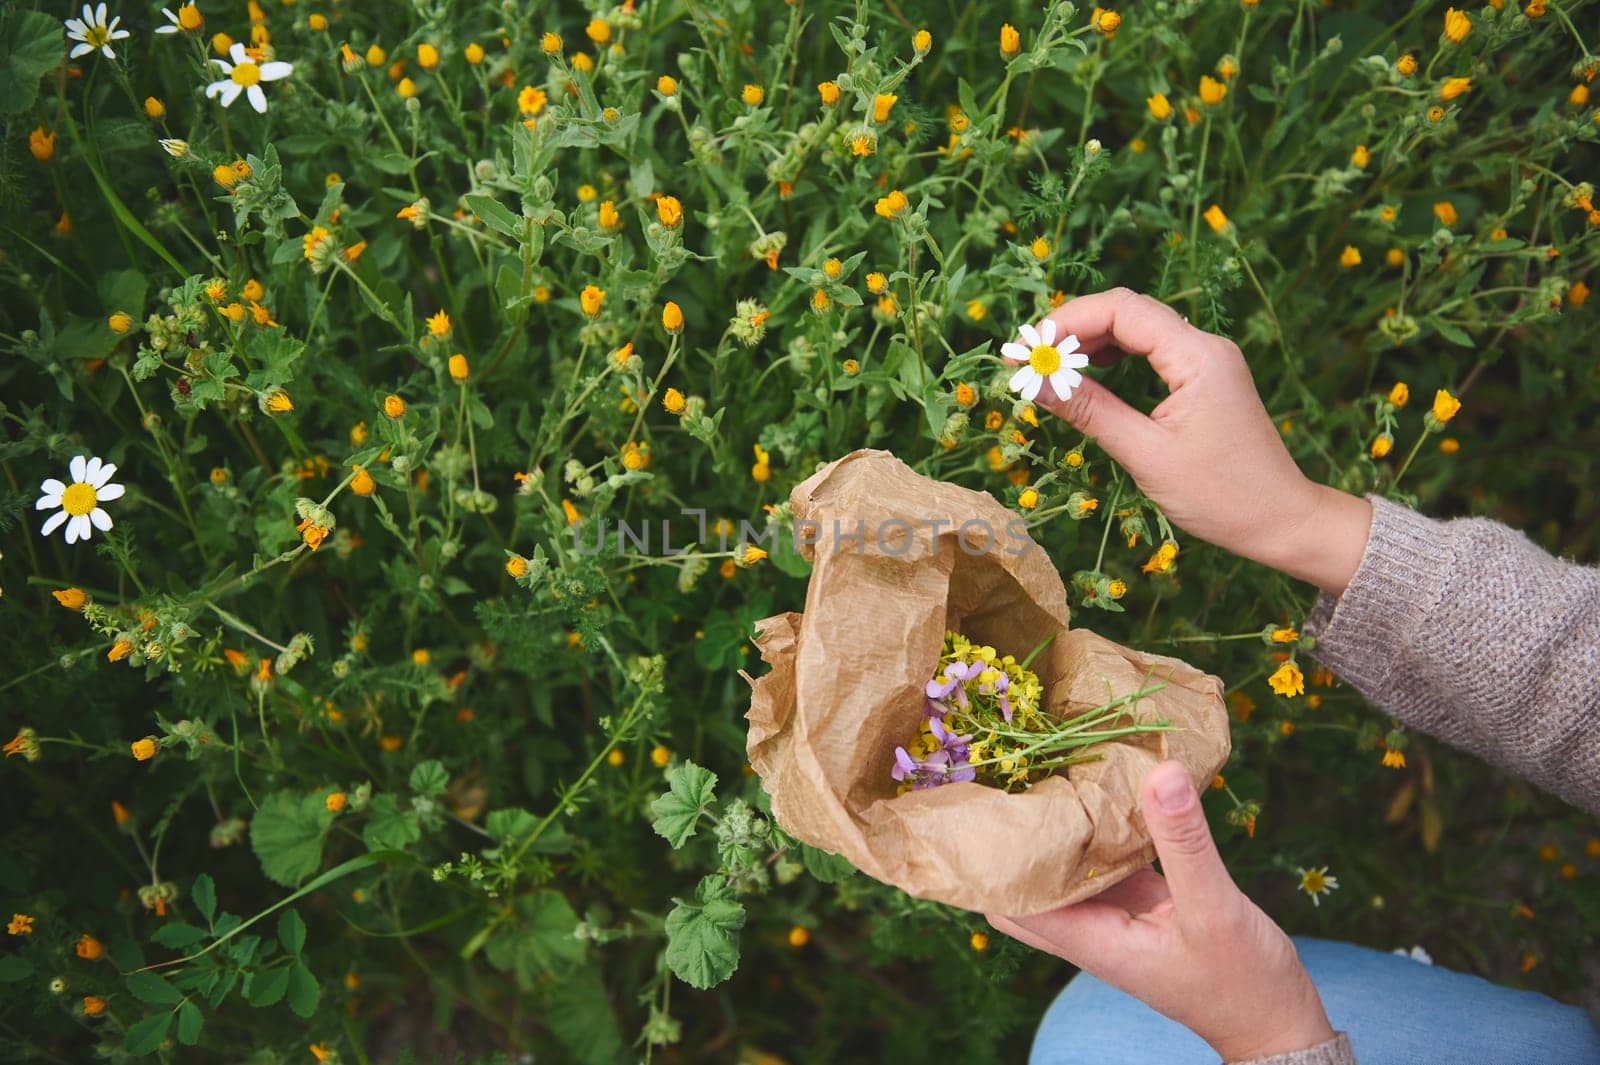 Herbalist woman collects calendula and chamomile flowers, prepares ingredients for traditional medicine or healing tea by artgf